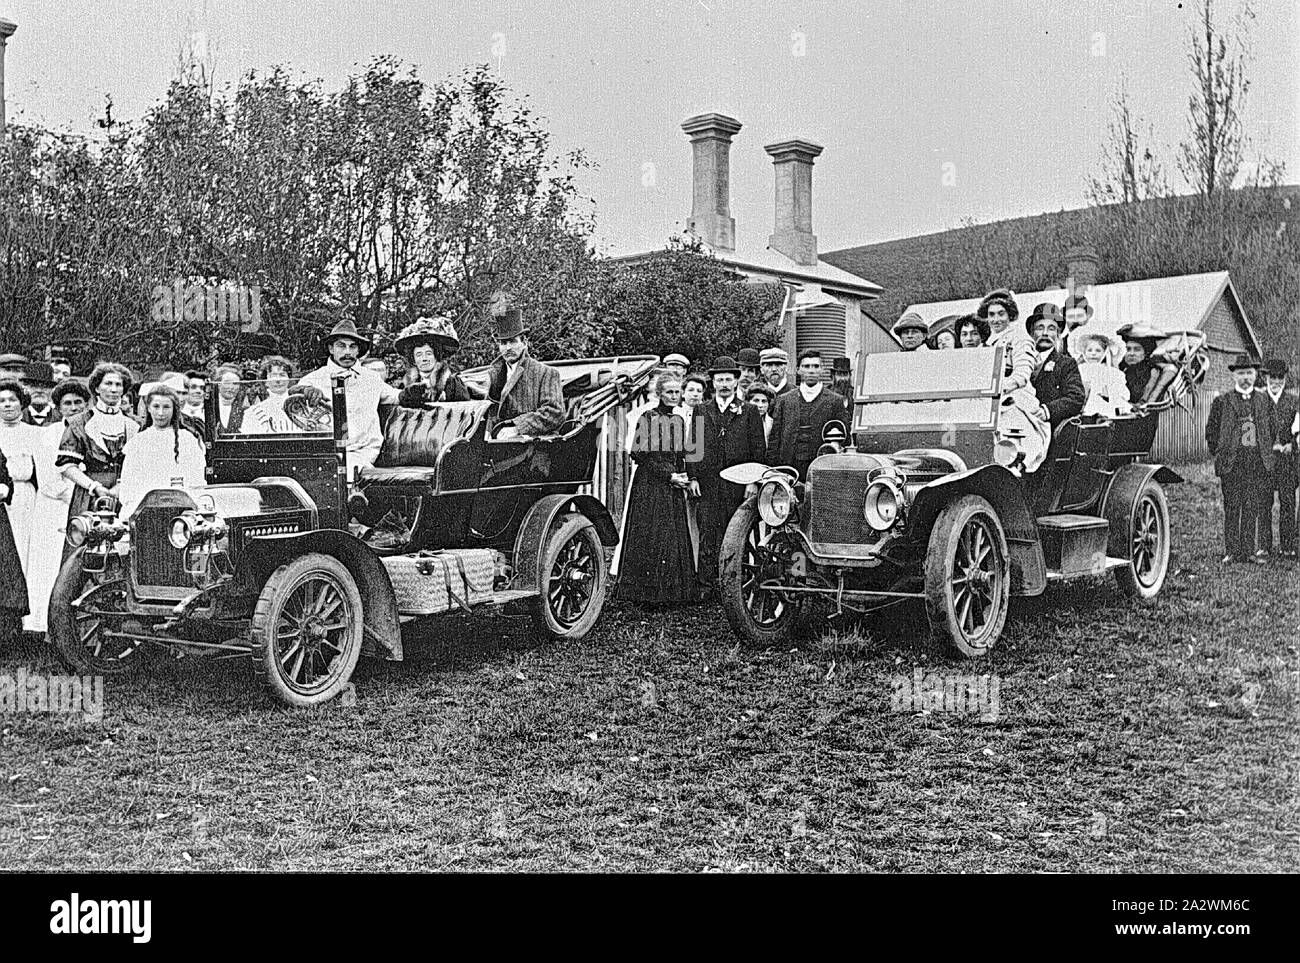 Negative - Wedding Party in Cars Surrounded by Onlookers, Scrubhill Dean, Victoria, 1909, The first time cars were used in Dean for a wedding. The wedding party (in the cars) is surrounded by onlookers. The building behind the group has two chimneys and a water tank Stock Photo